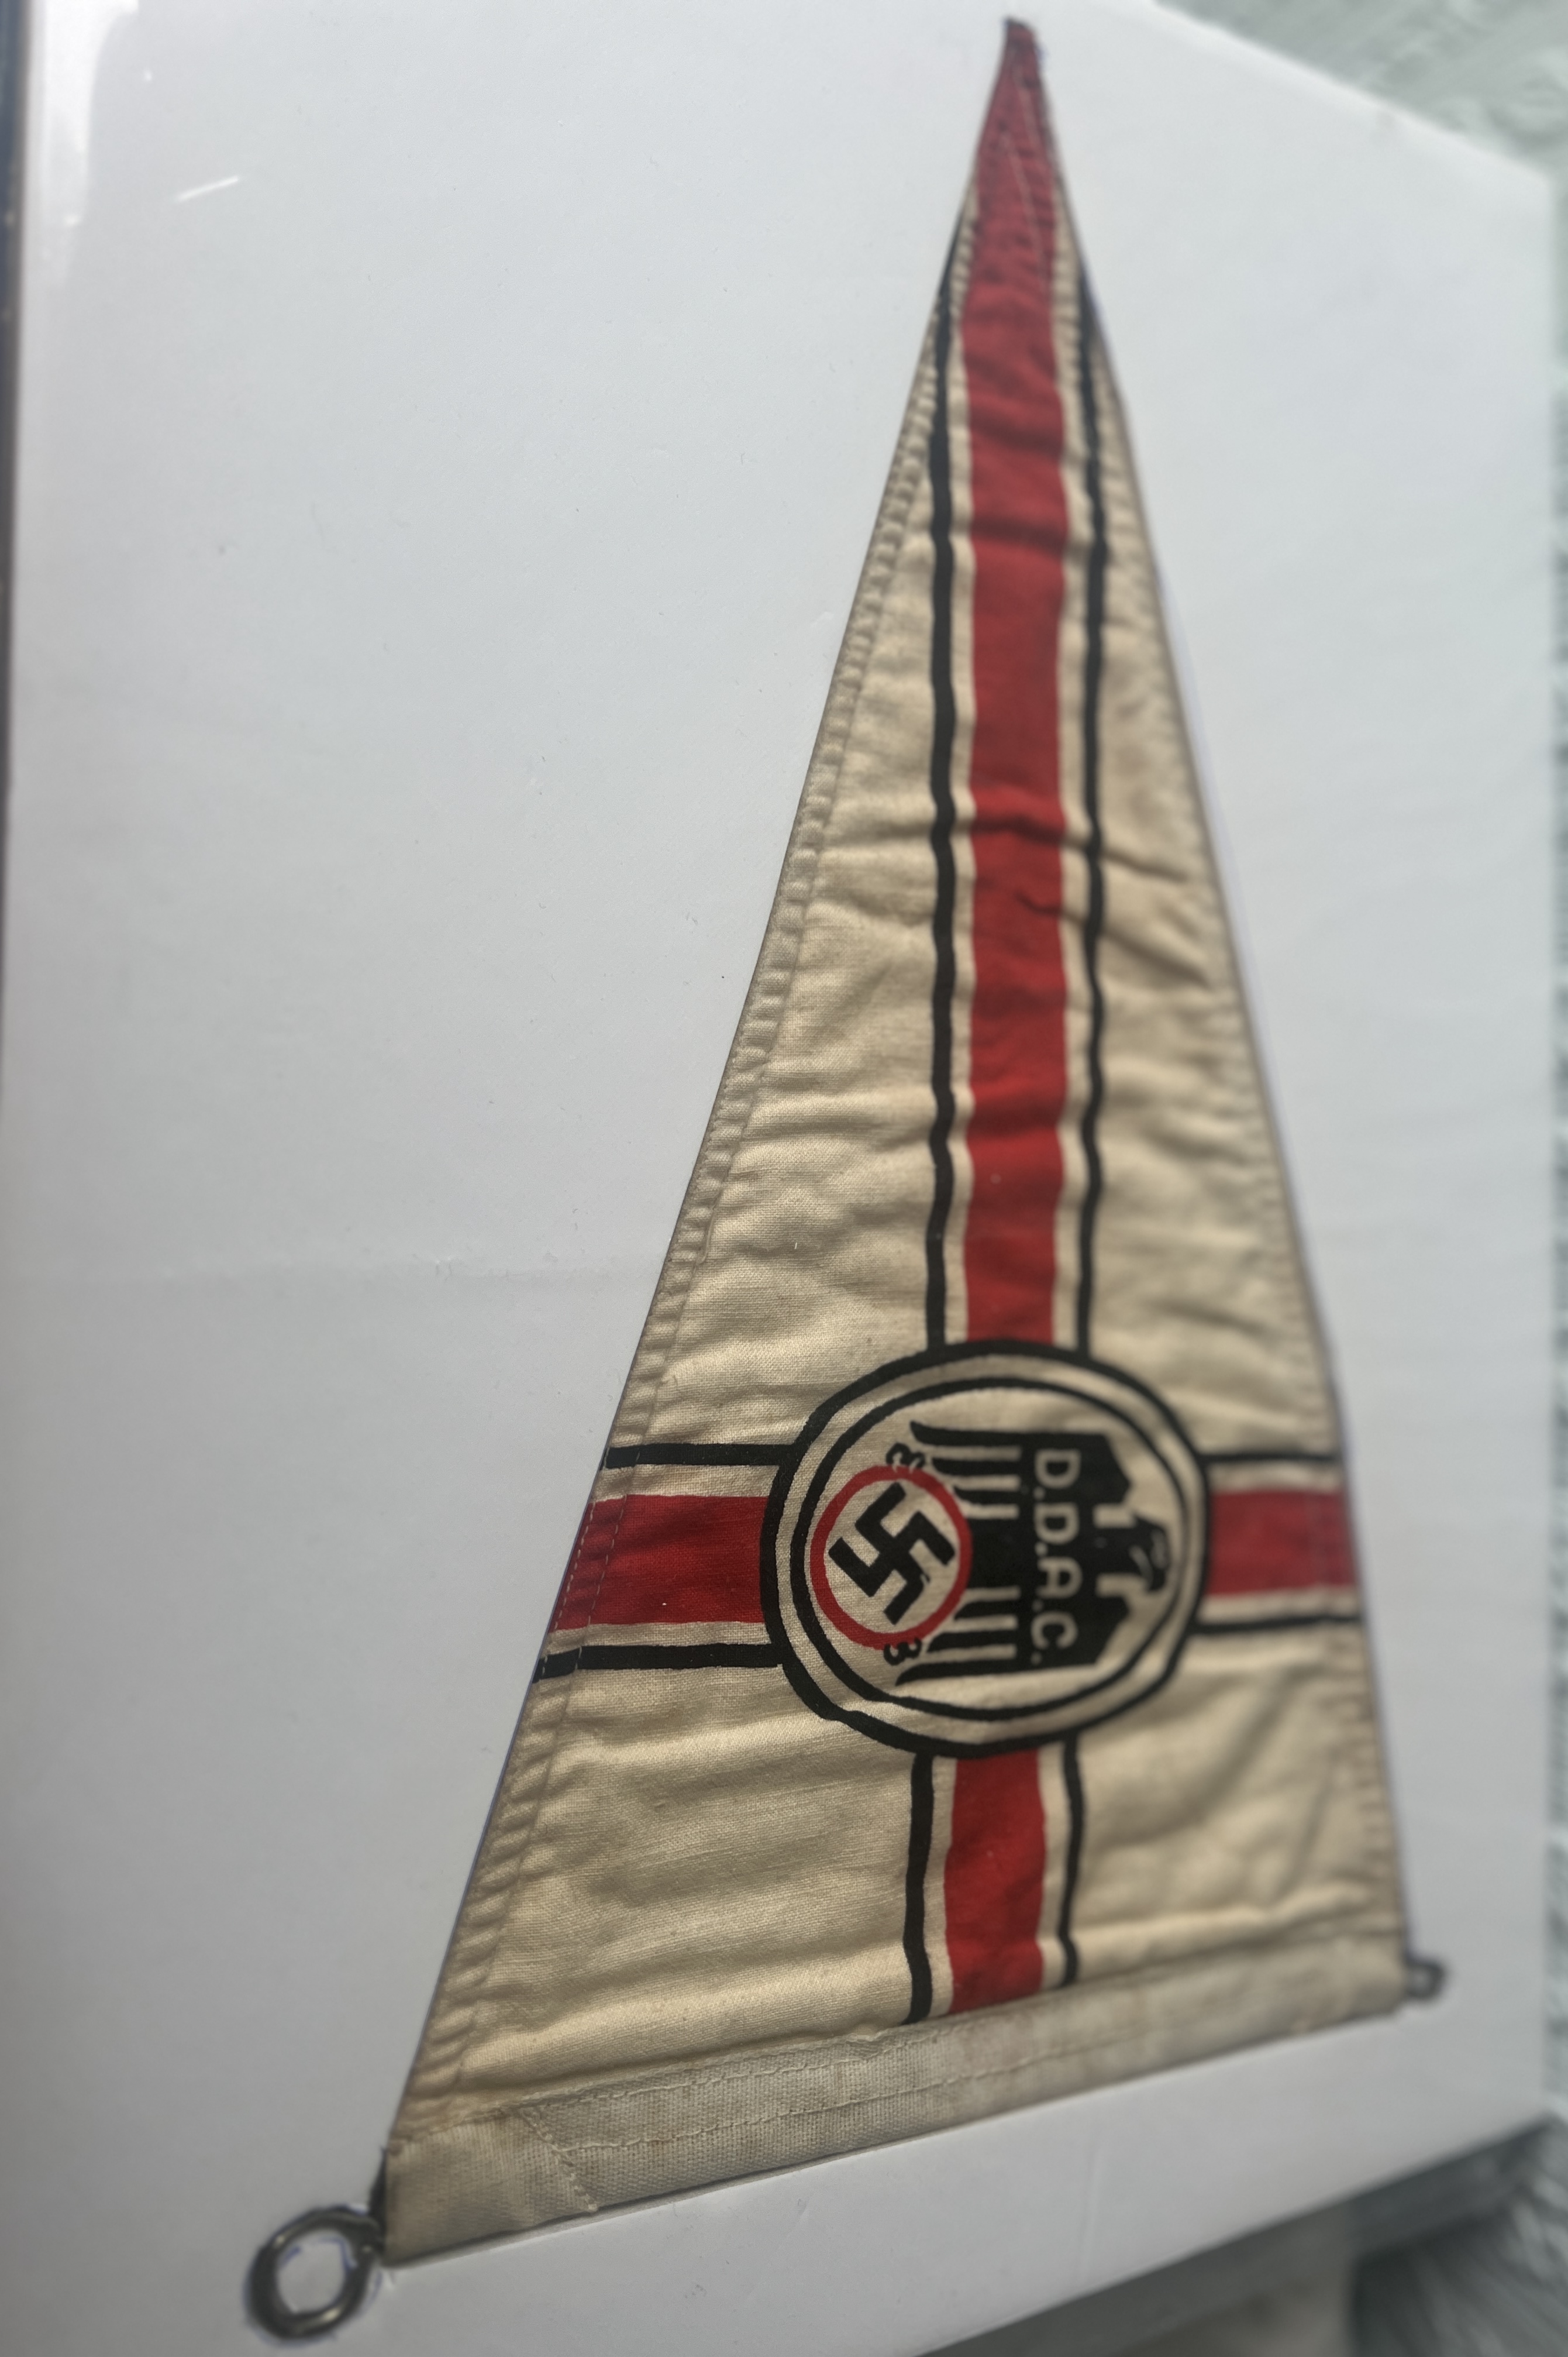 overall impression modern art deco design, black eagle with swastika, triangular pennant in red white and black